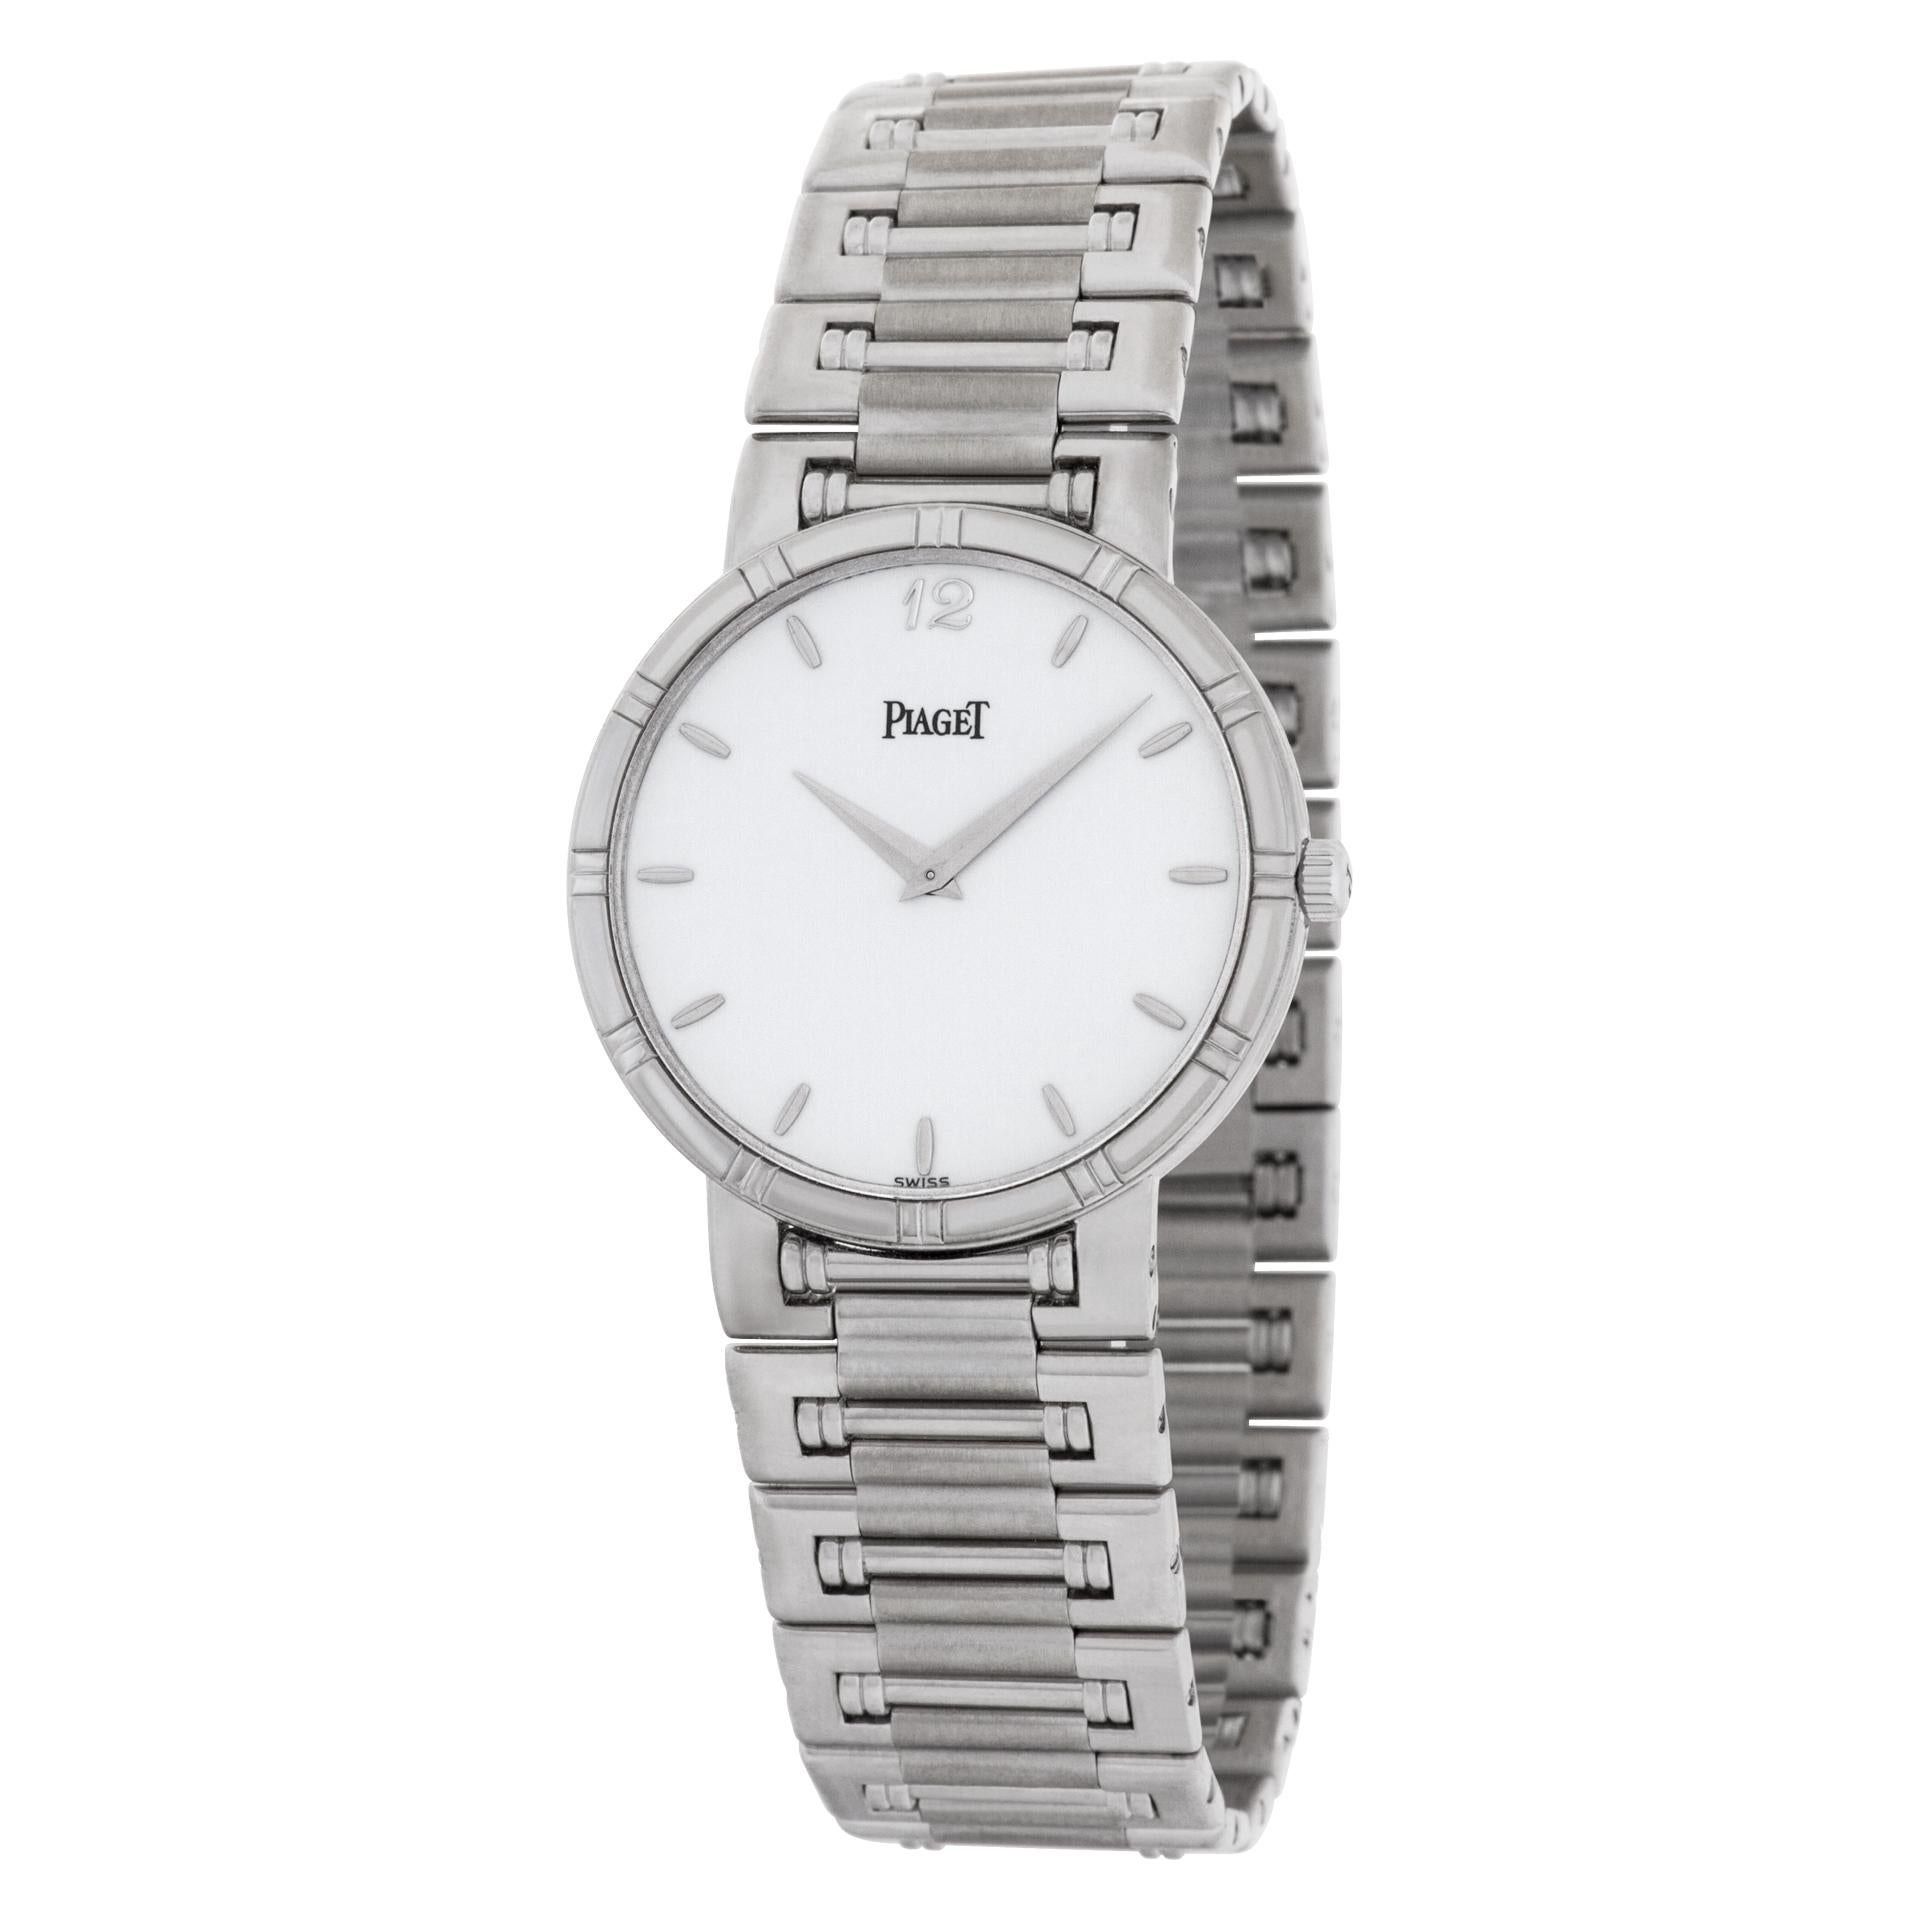 Piaget Dancer in 18k white gold. Manual. Fits 7.5 inches wrist. 31 mm case size. With papers. Ref 94023 N K 81. Circa 2000s. Fine Pre-owned Piaget Watch. Certified preowned Classic Piaget Dancer 94023NK81 watch is made out of white gold on a 18k